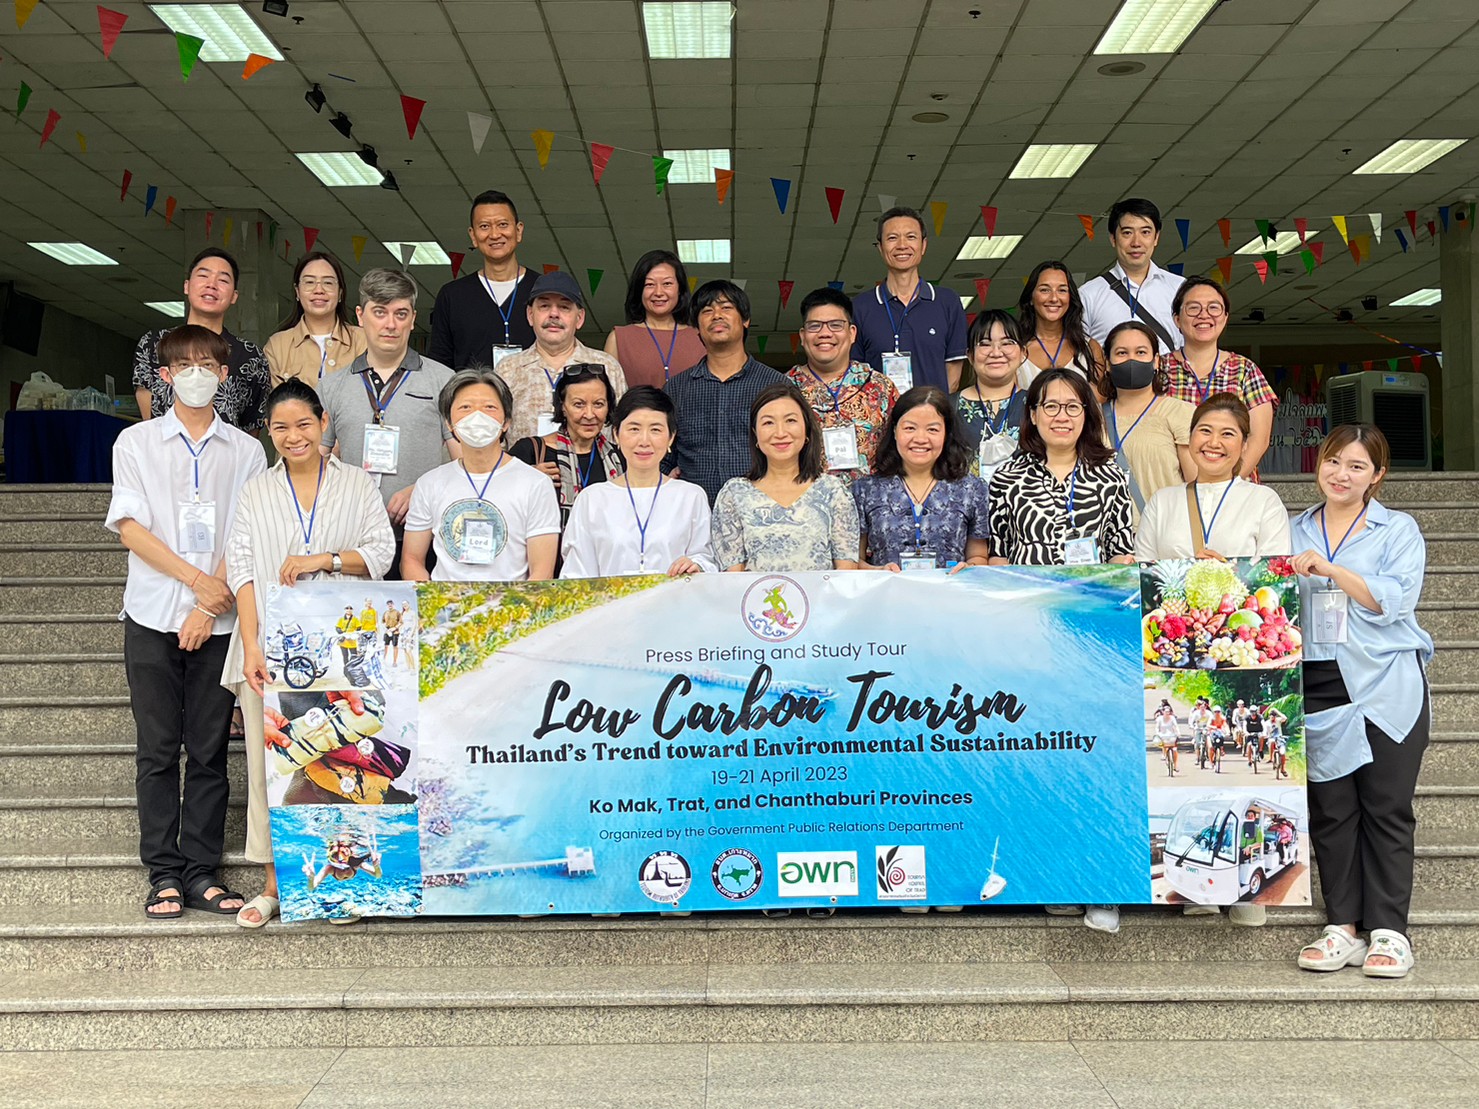 Press Briefing and Study Tour  “Low-Carbon Tourism: Thailand’s Trend toward Environmental Sustainability”